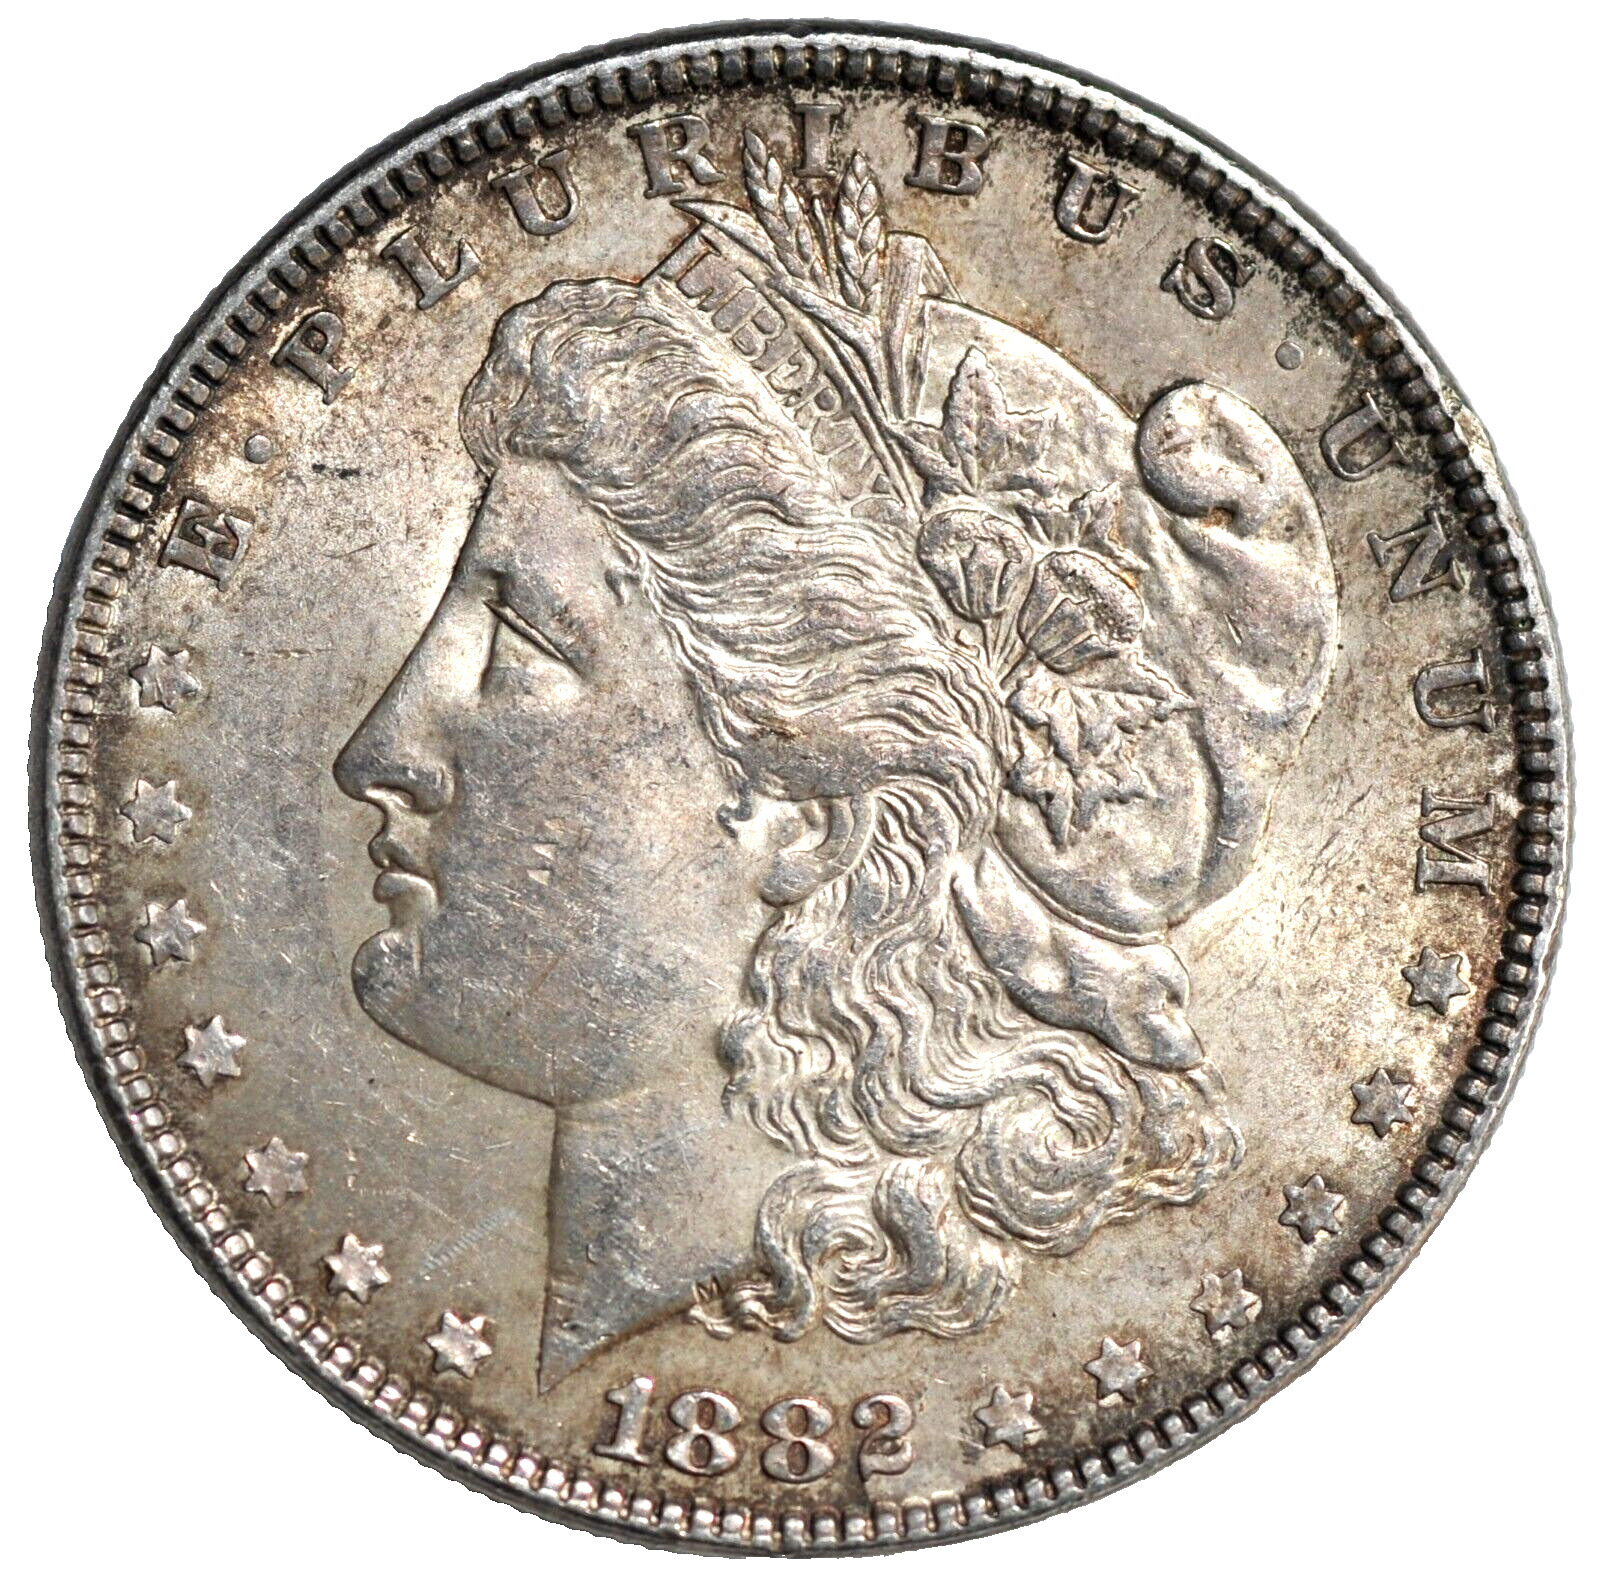 1882 Morgan silver dollar 90% silver in XF or better condition.